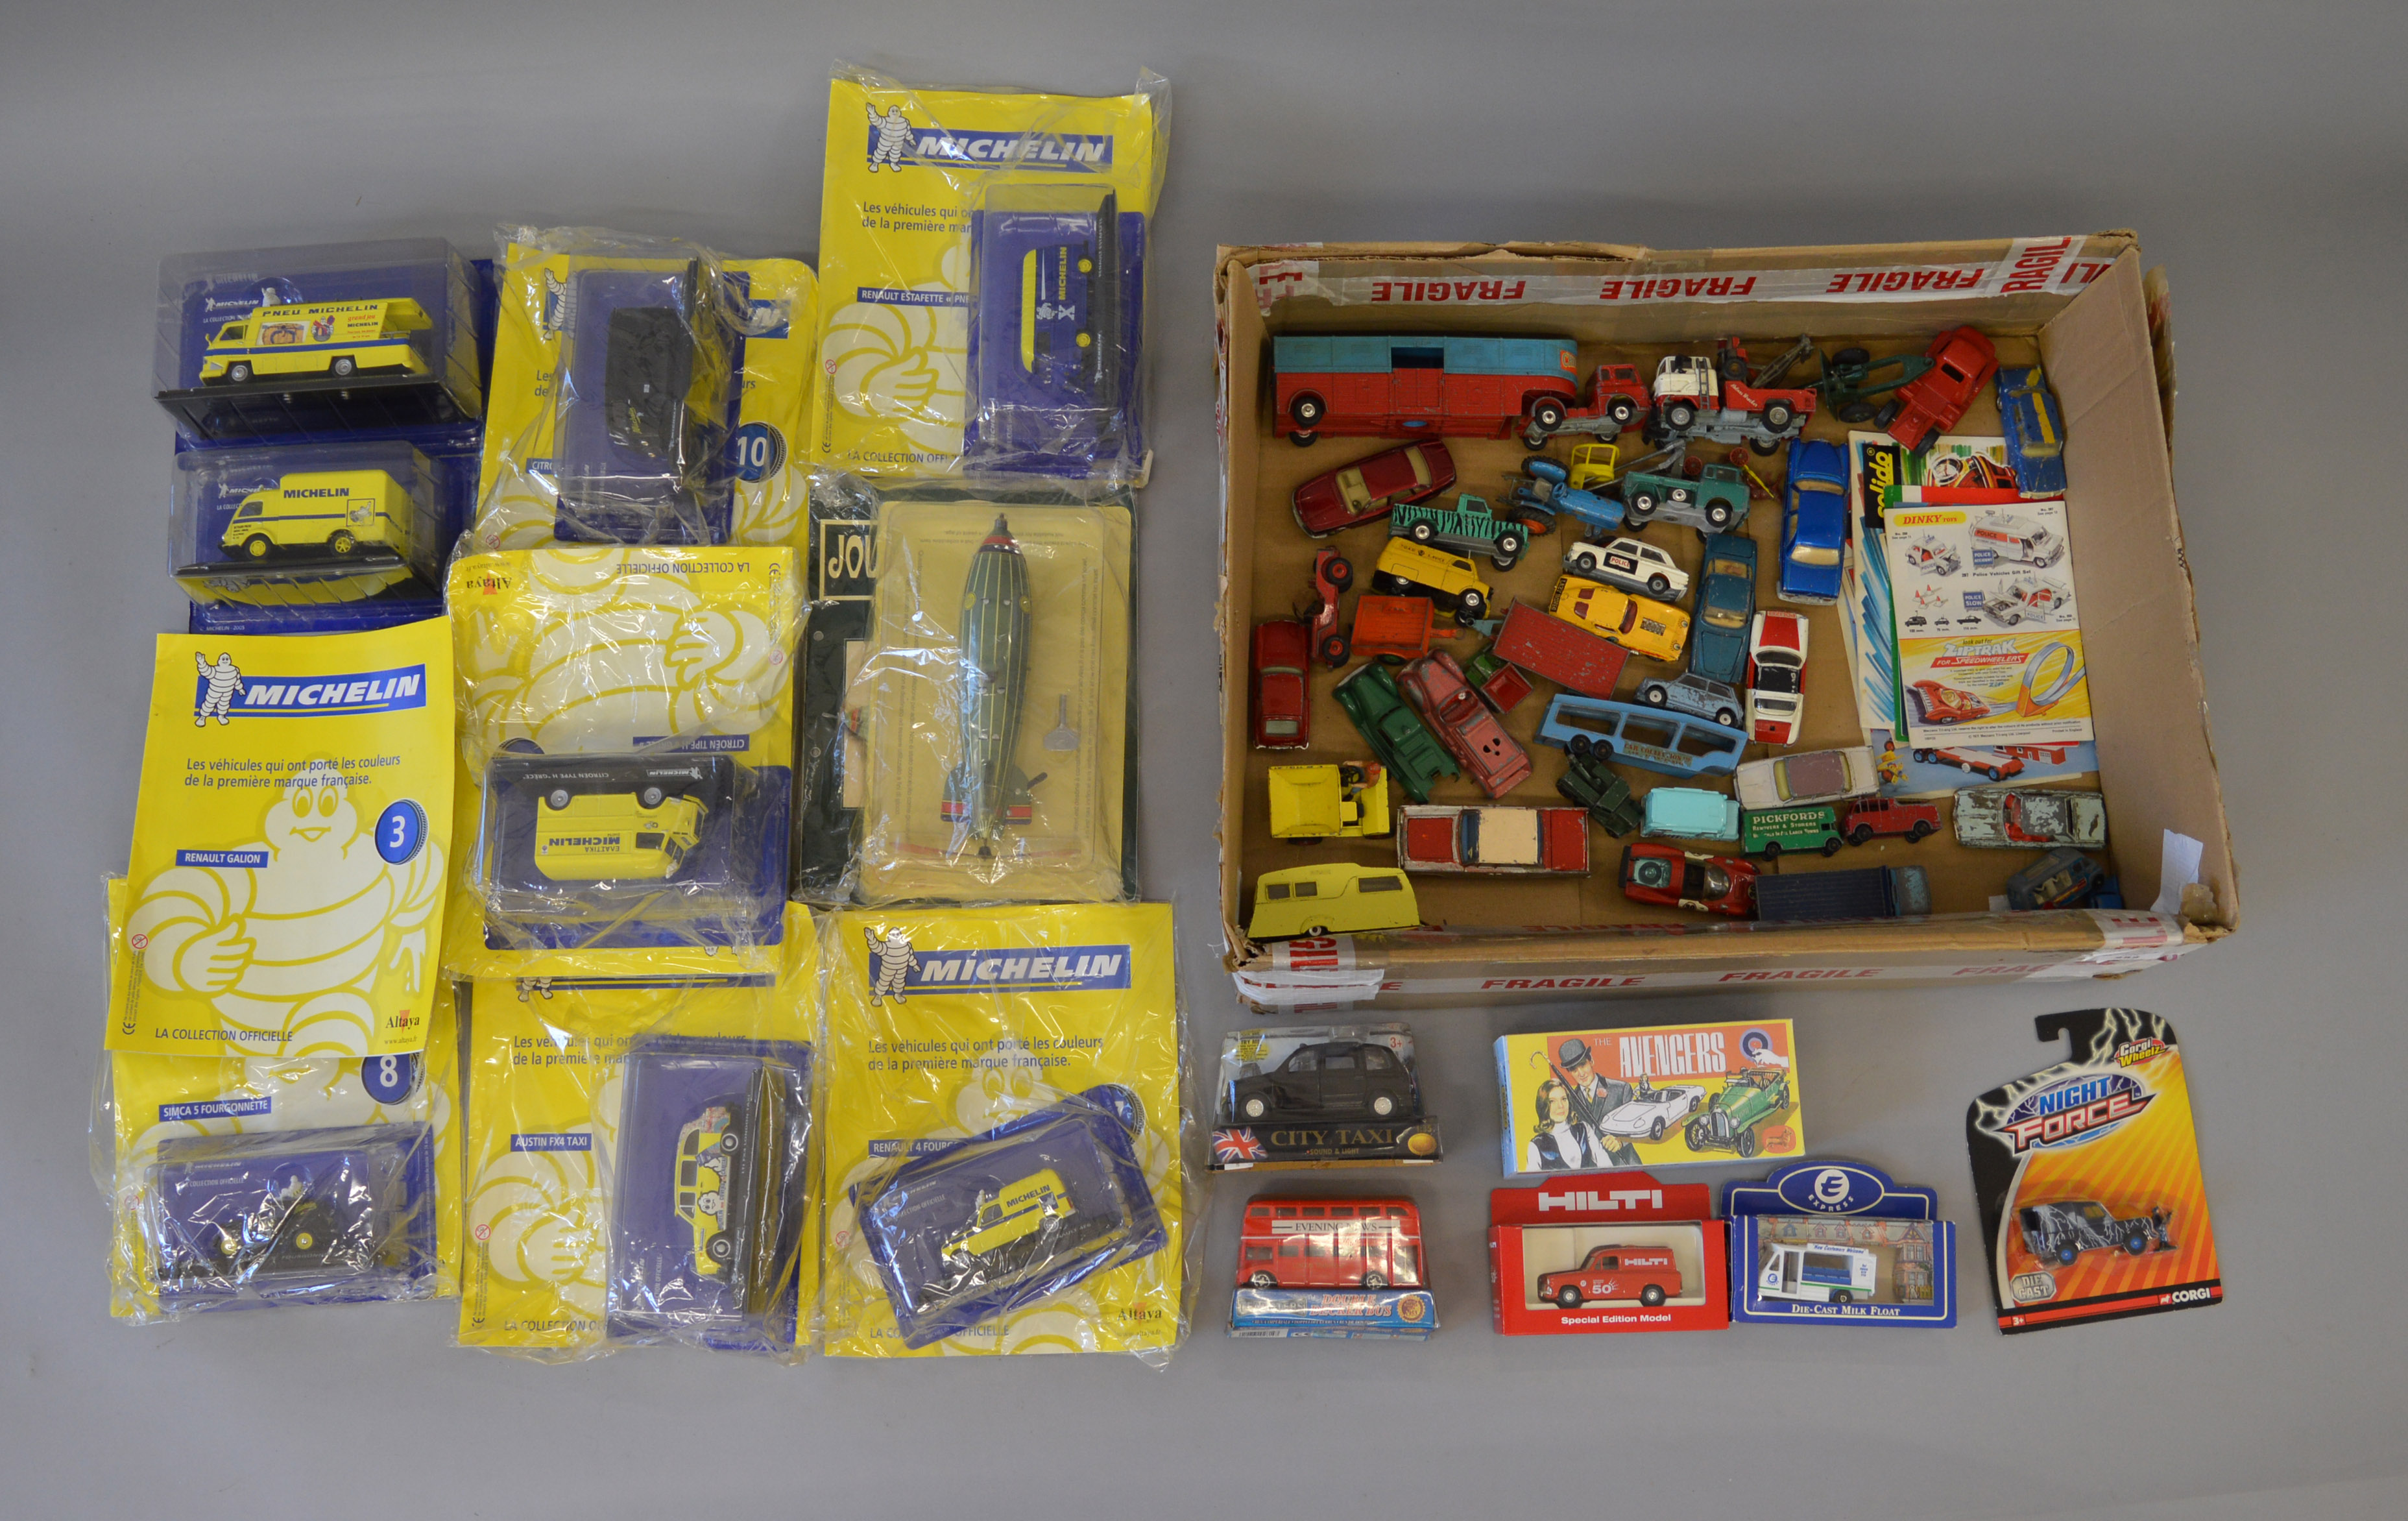 Approx 40 assorted playworn diecast models together with some vintage catalogues and magazine issue